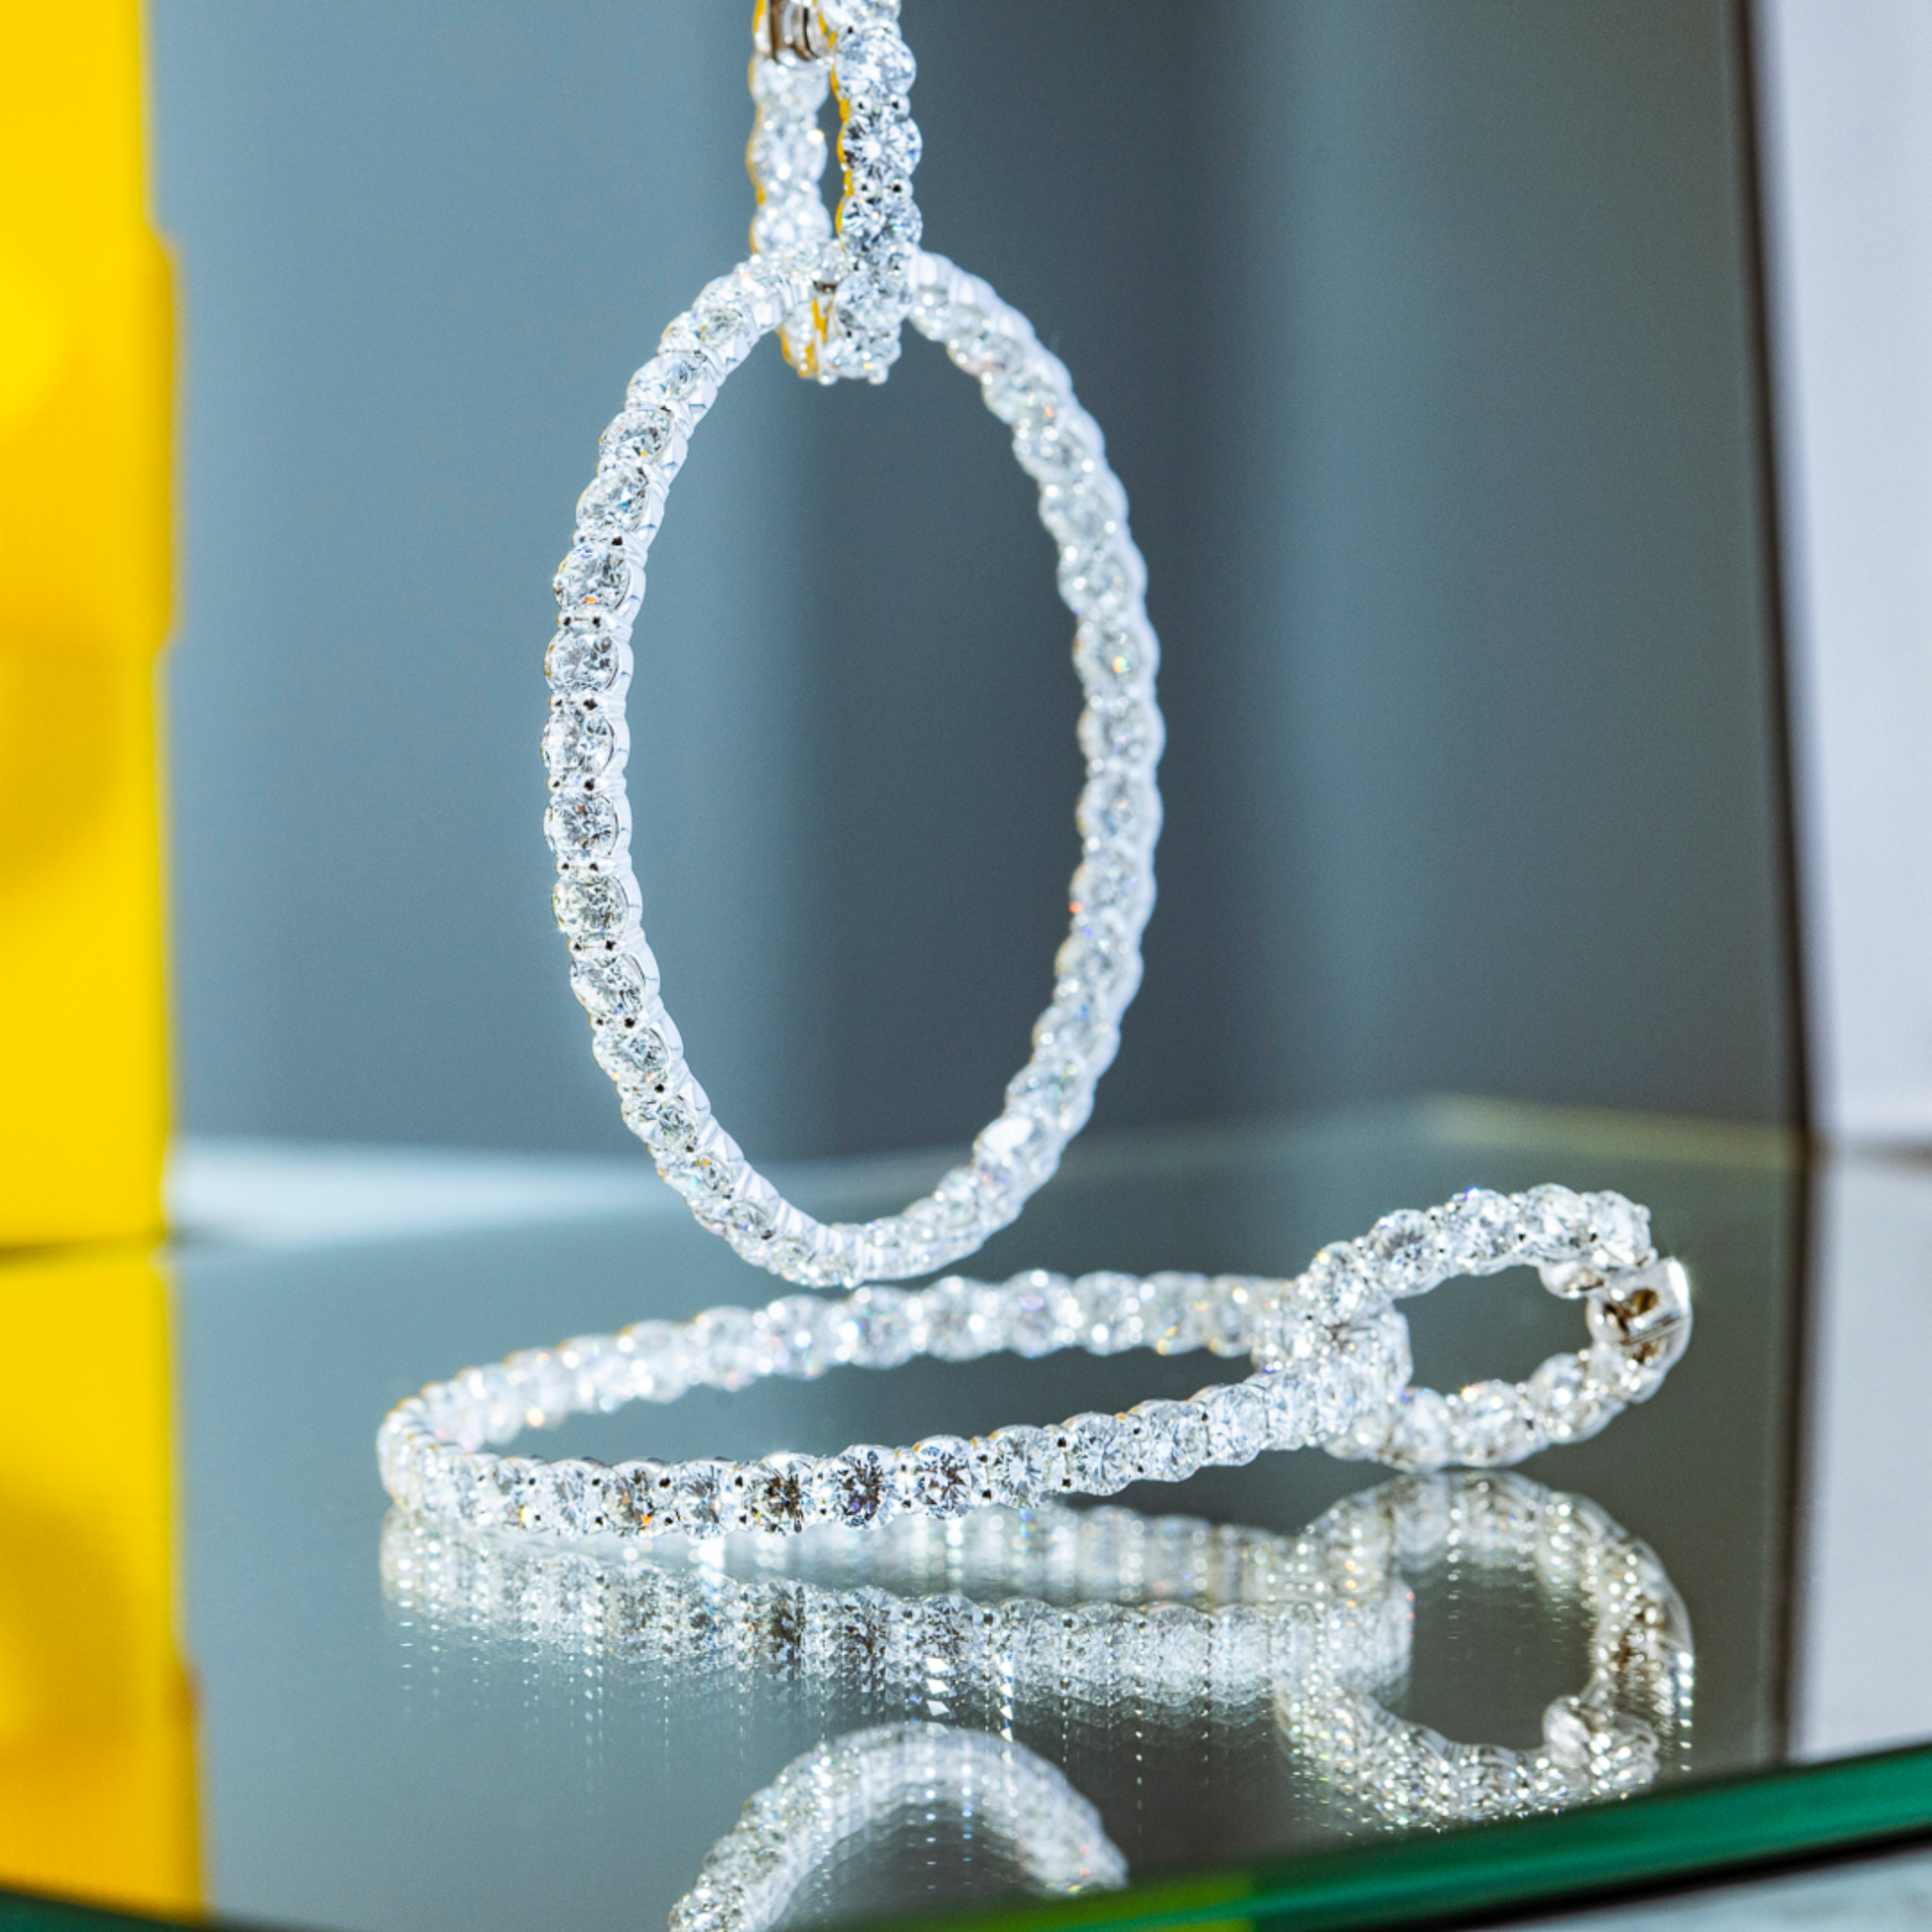 Oliver Heemeyer St. Tropez Diamond Hoops made of 18k white gold. Different perspective 2.